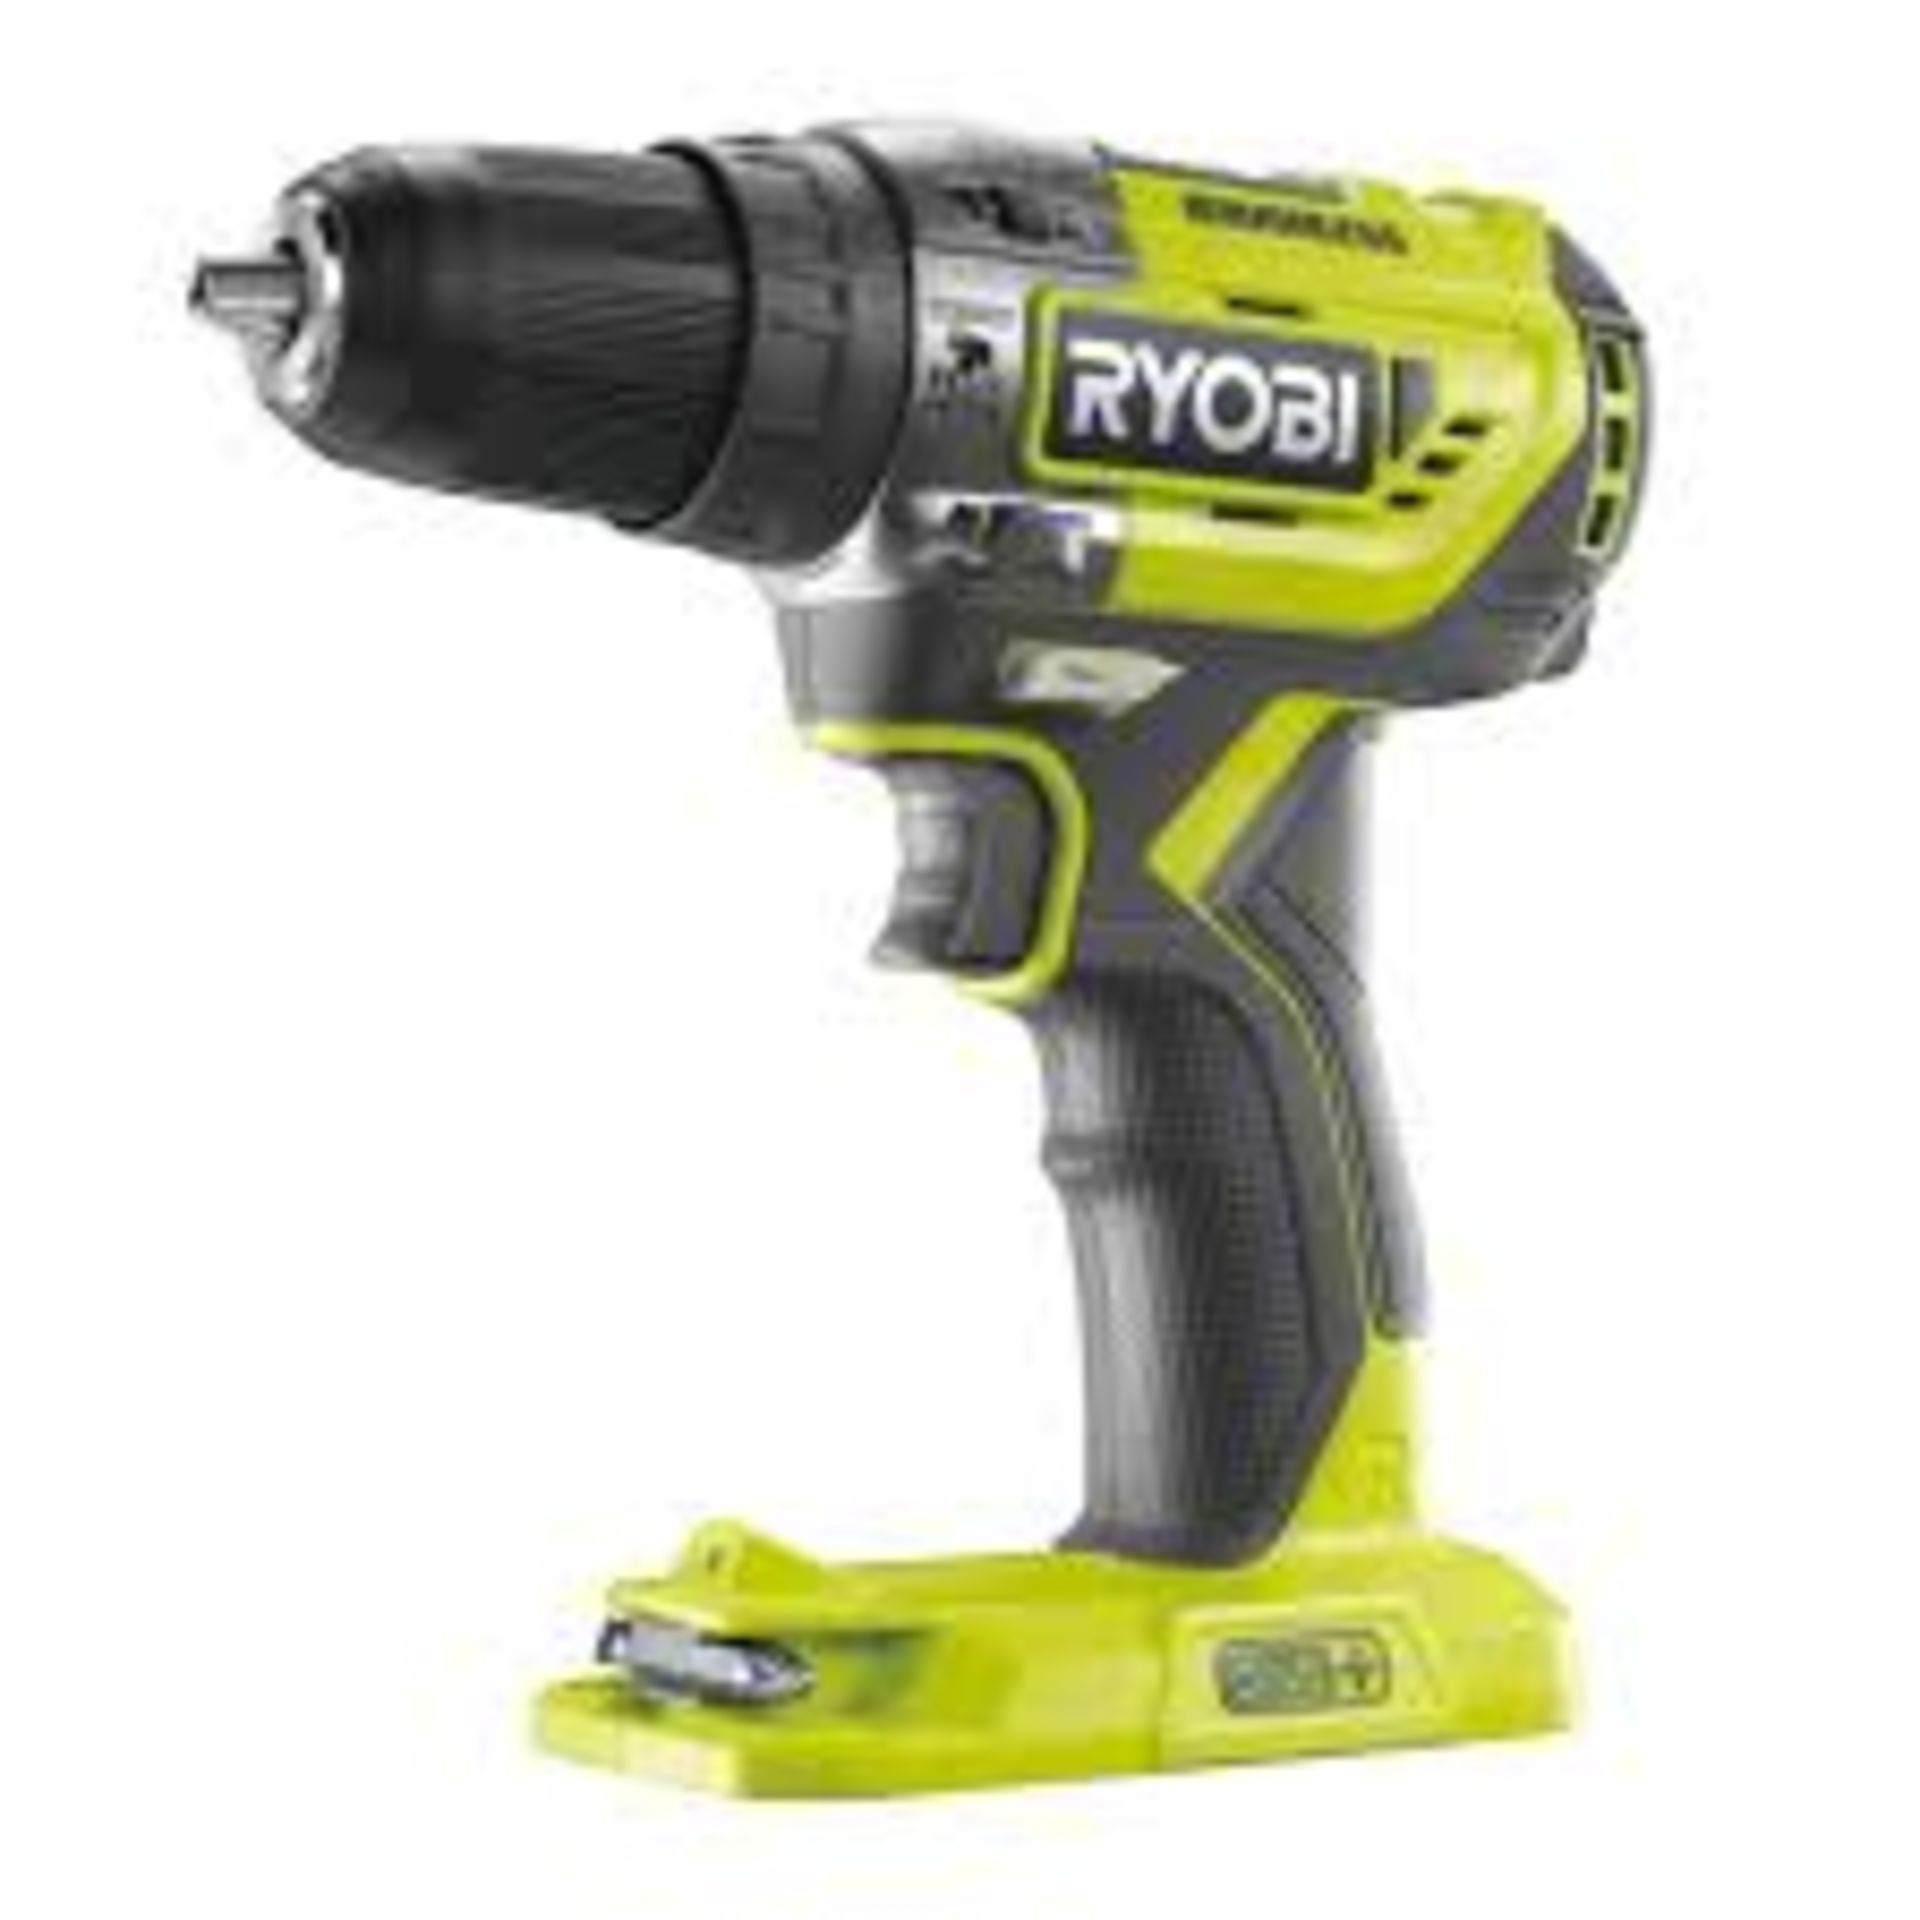 Ryobi R18PD5-0 18V ONE+ Cordless Compact Brushless Combi Drill. - ER44. With 2 Batteries & Carry